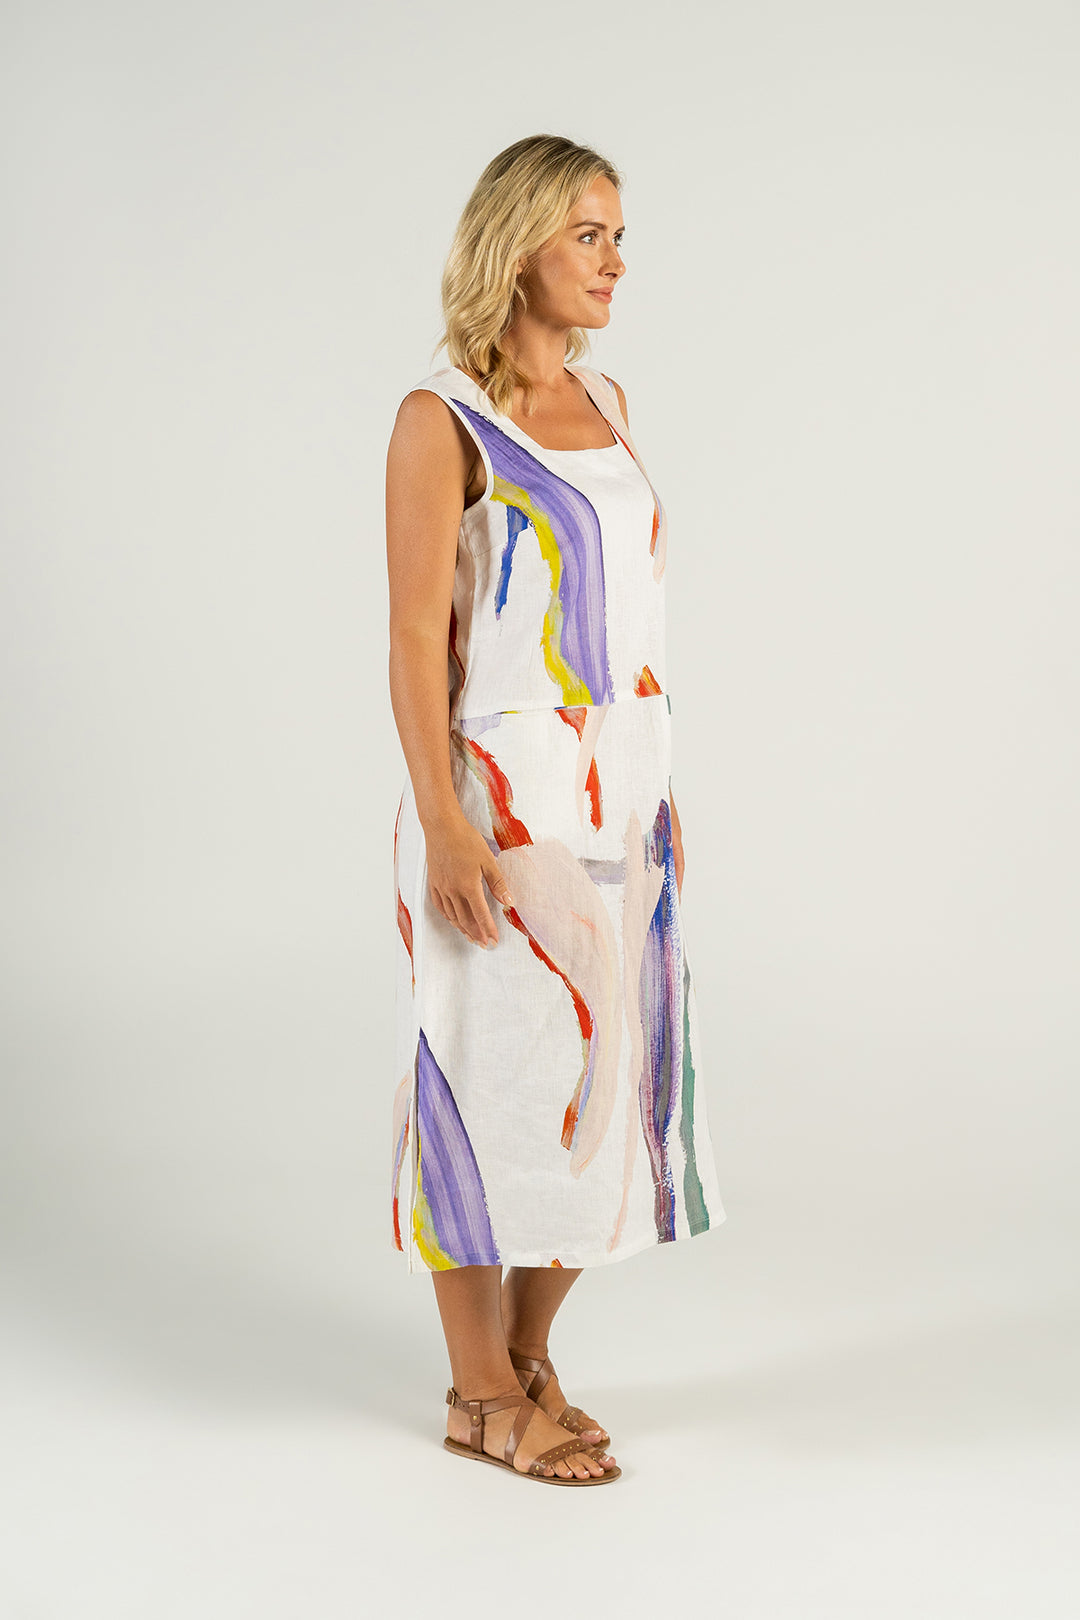 Woman wearing a white linen dress with splashes of colour front view from Pizazz Boutique Nelson Bay Dress Shop